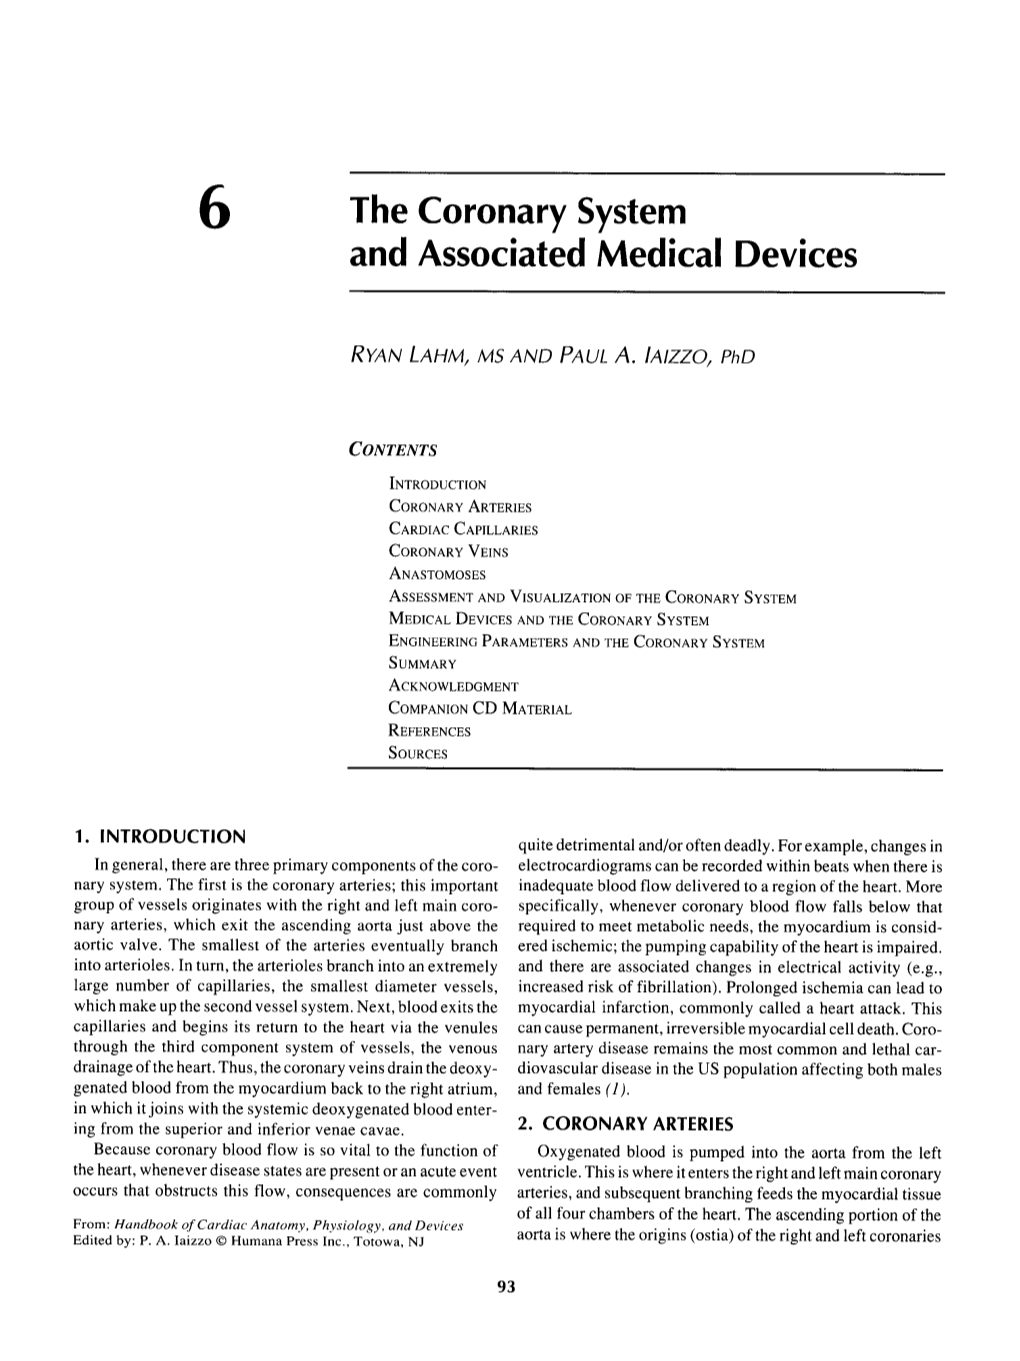 The Coronary System and Associated Medical Devices